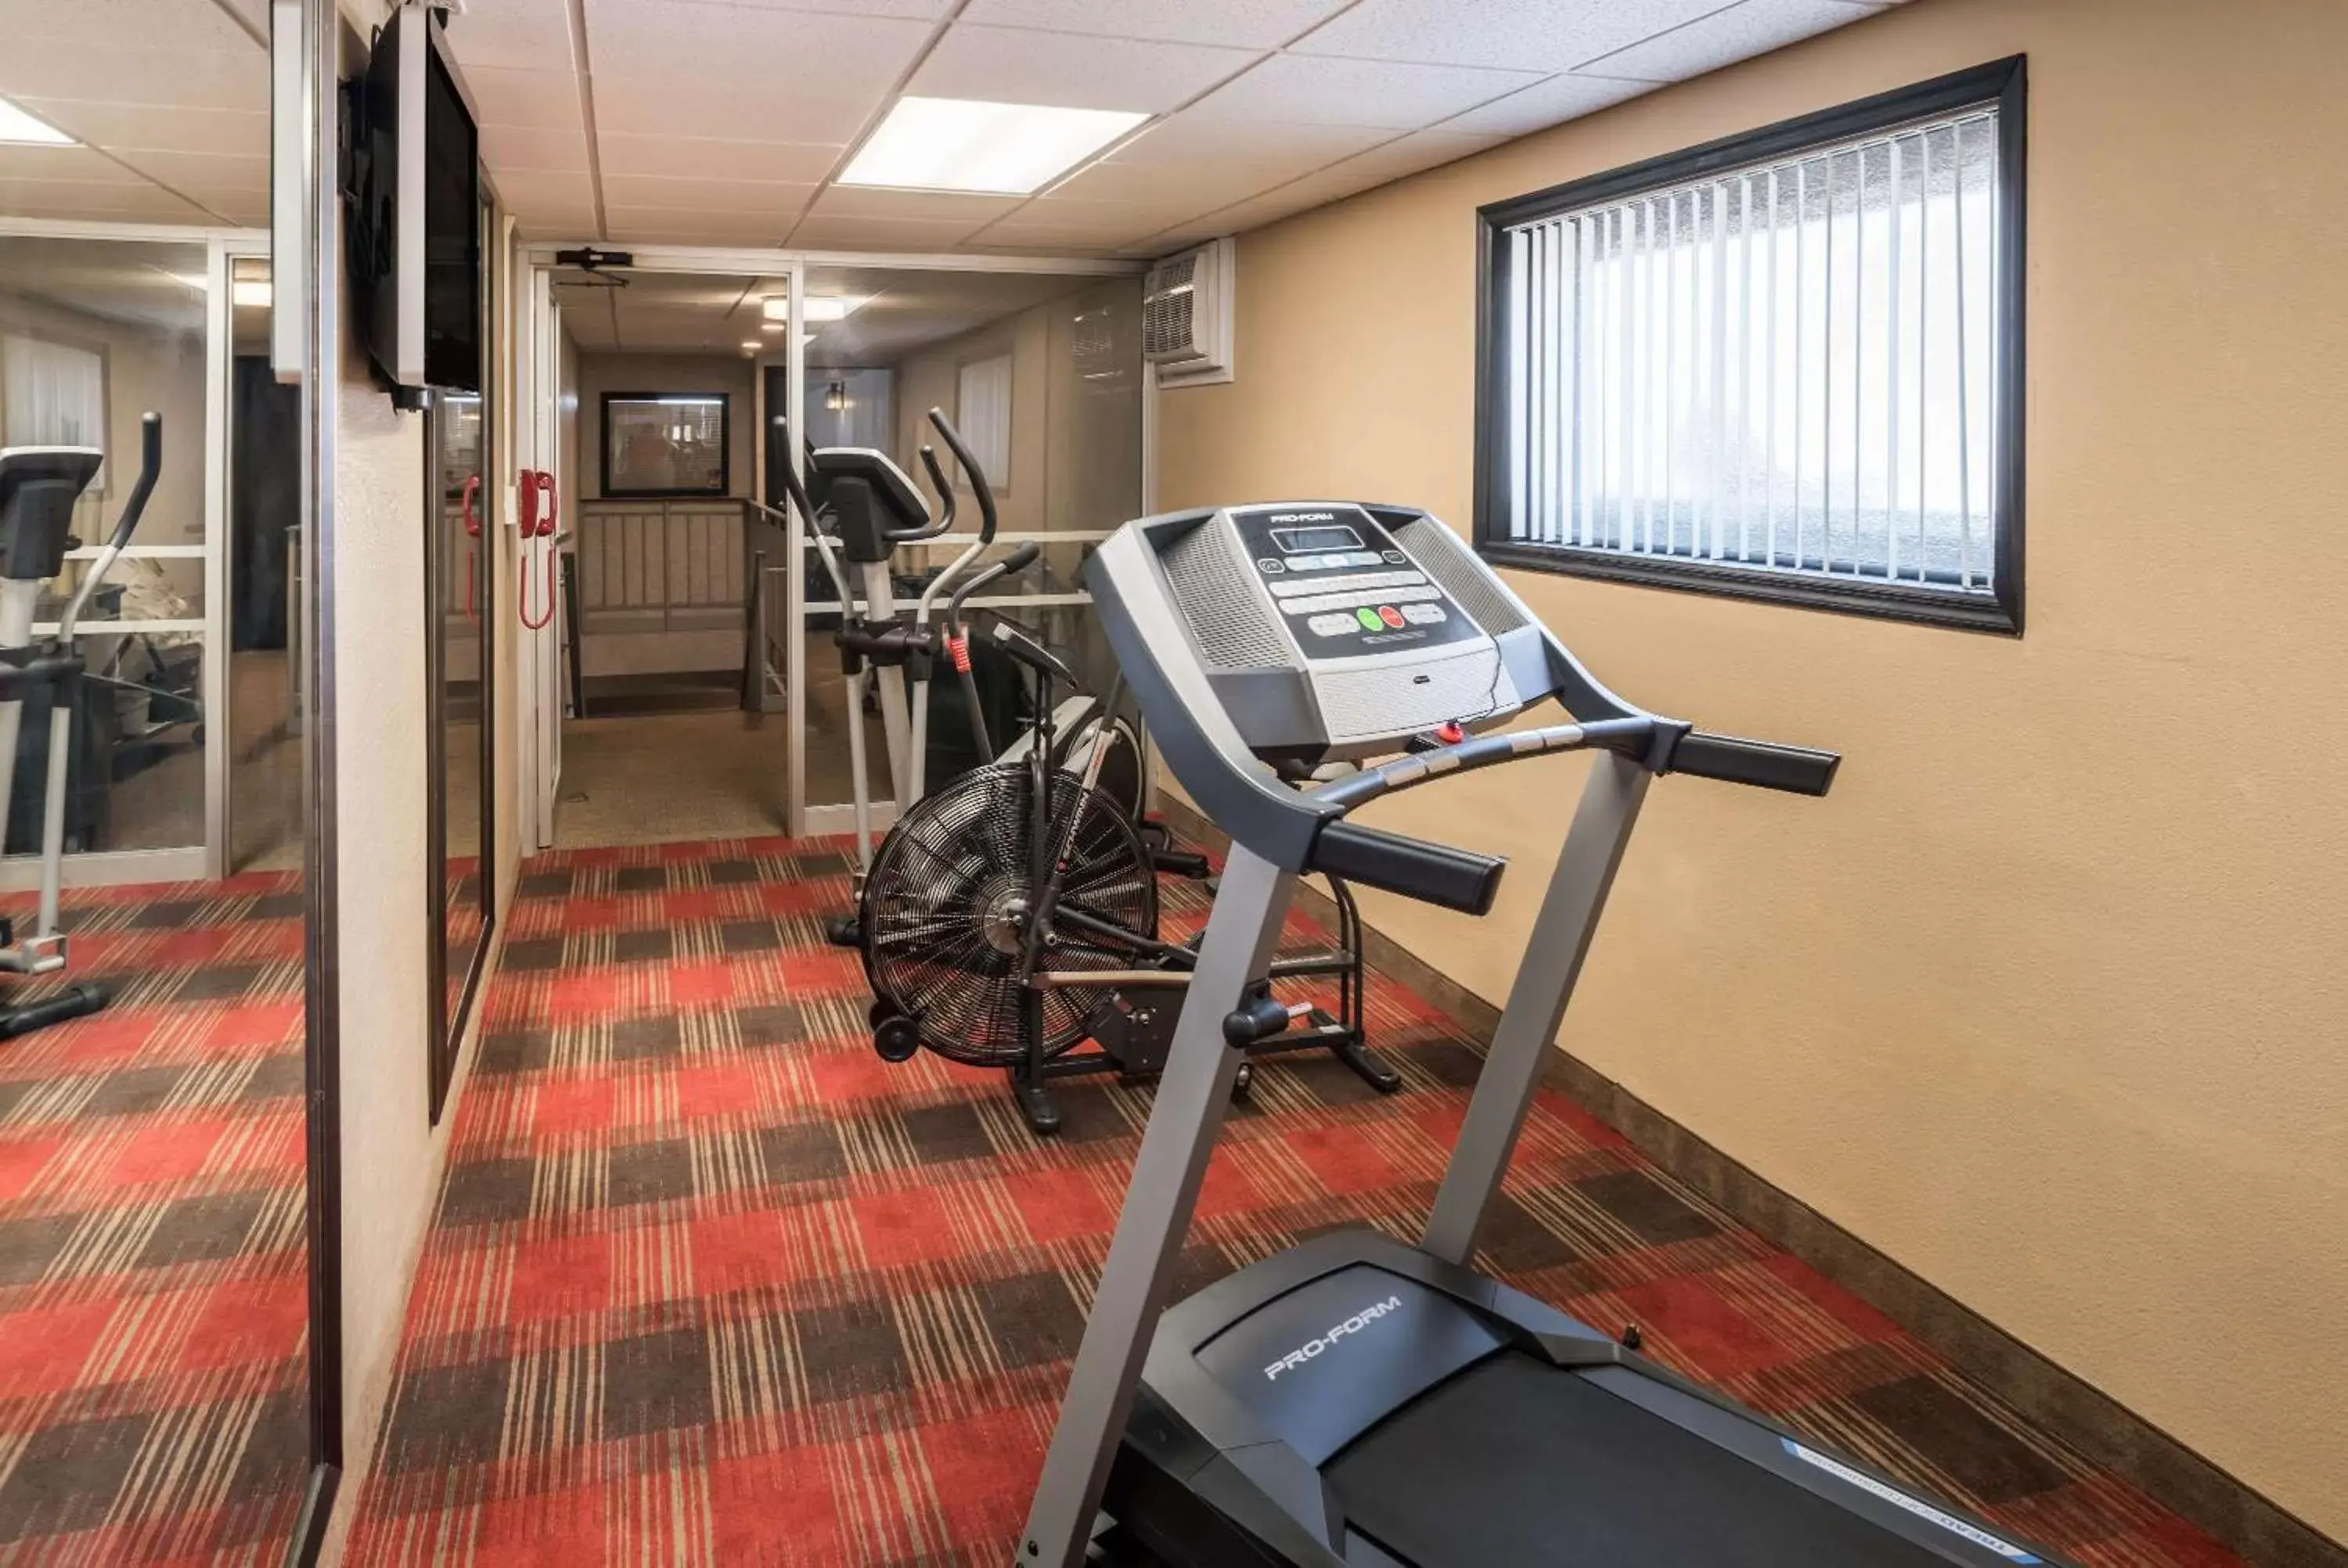 Fitness centre/facilities, Fitness Center/Facilities in Ramada by Wyndham Grand Forks